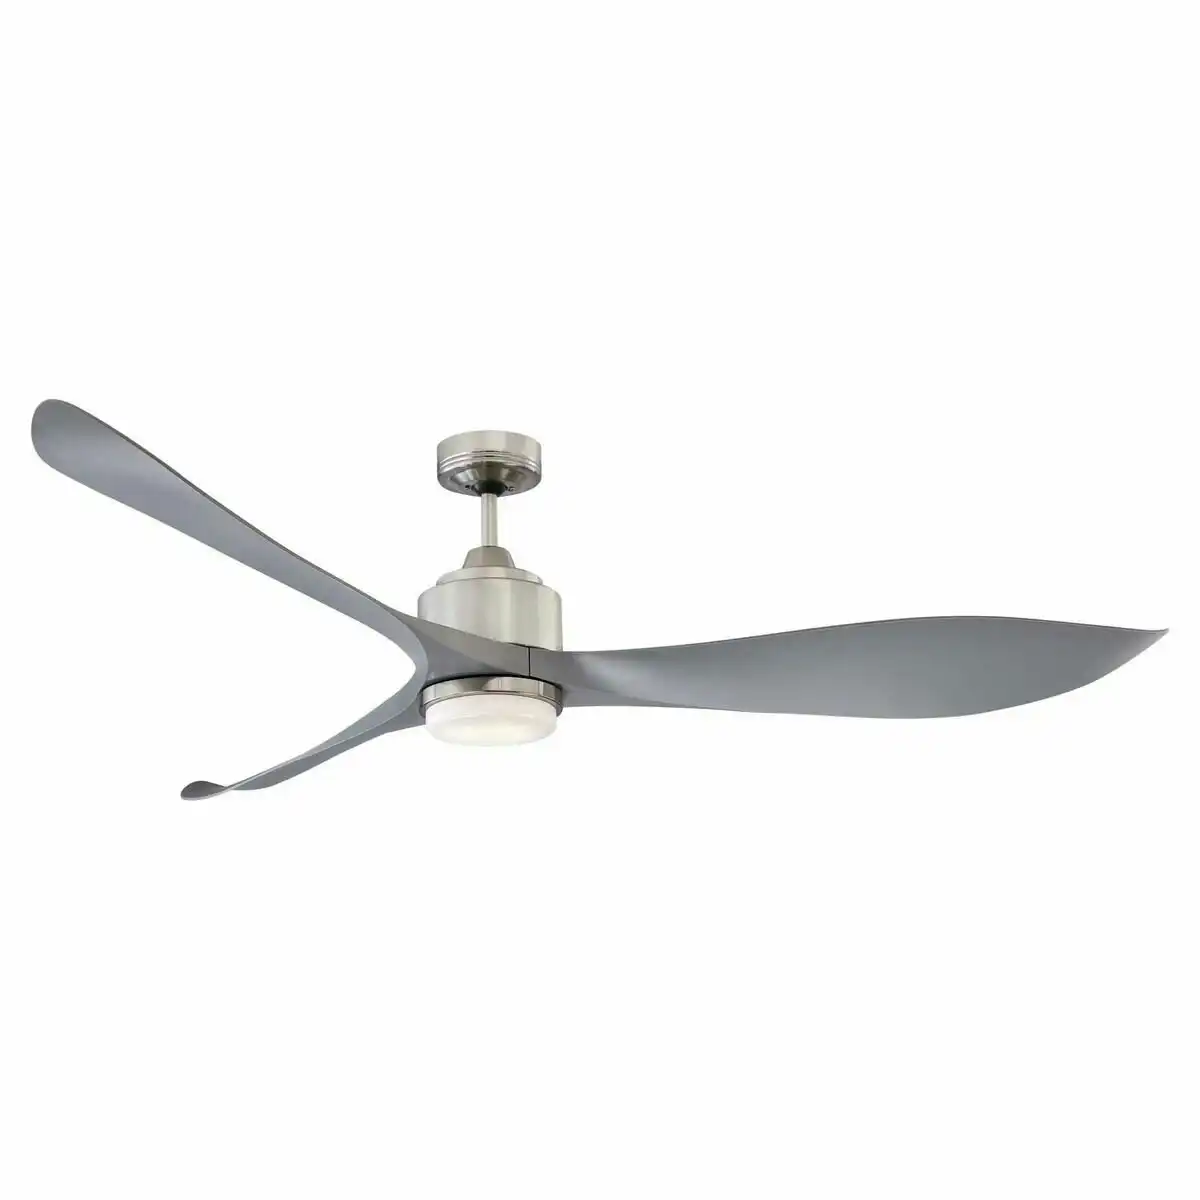 Mercator Eagle XL Chrome 1676mm (66 Inch) Ceiling Fan with Light